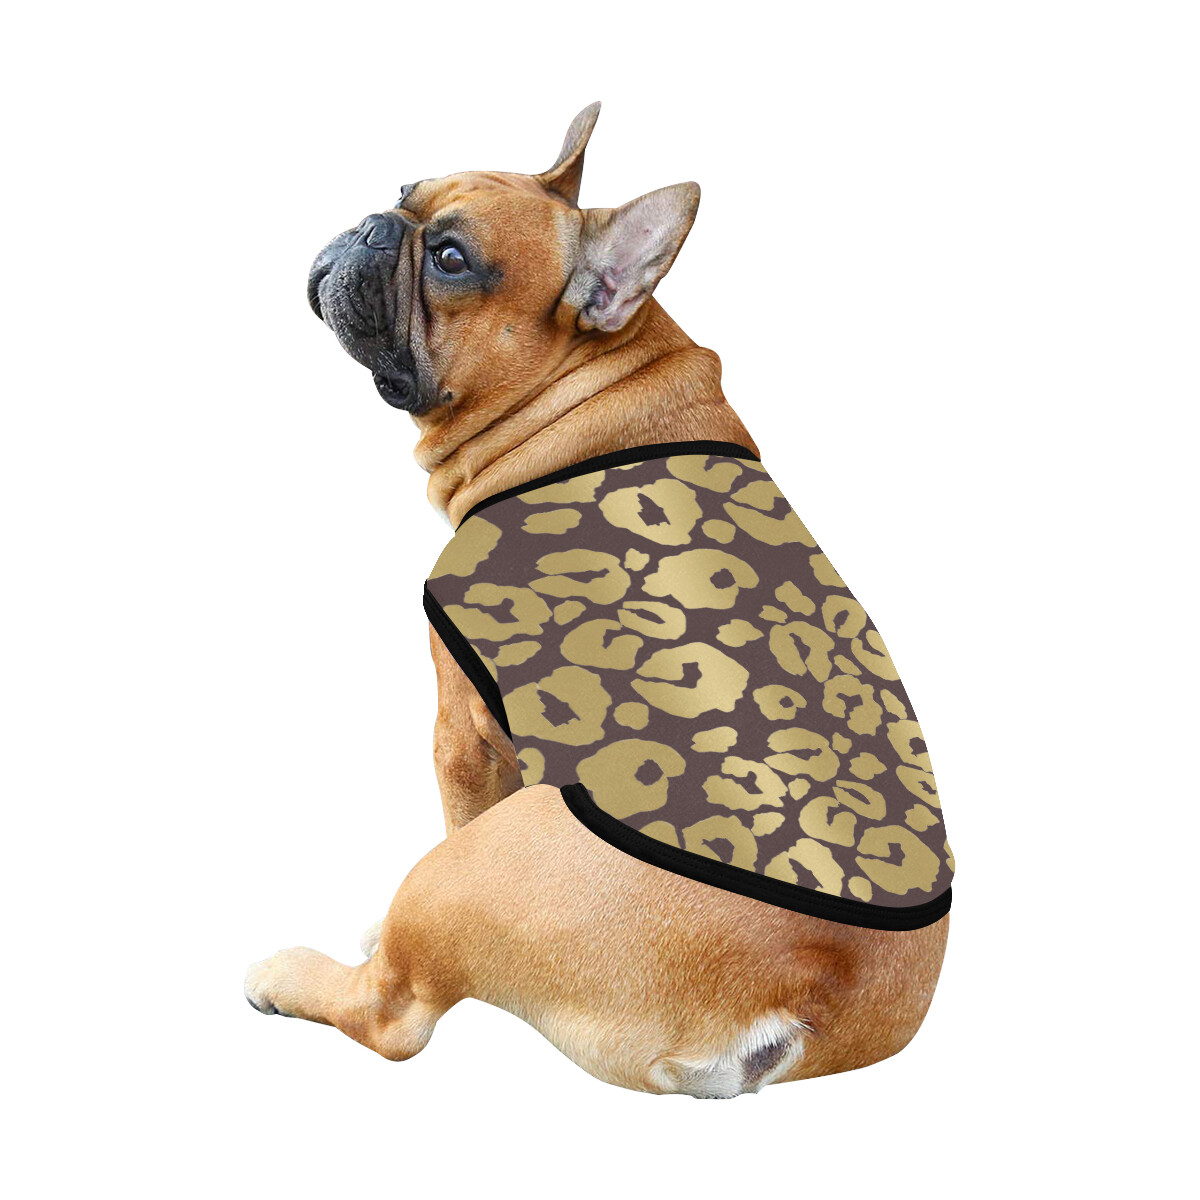 🐕 Leopard print Dog shirt, Dog Tank Top, Dog t-shirt, Dog clothes, Gifts, front back print, 7 sizes XS to 3XL, dog gifts, gold and chocolate brown